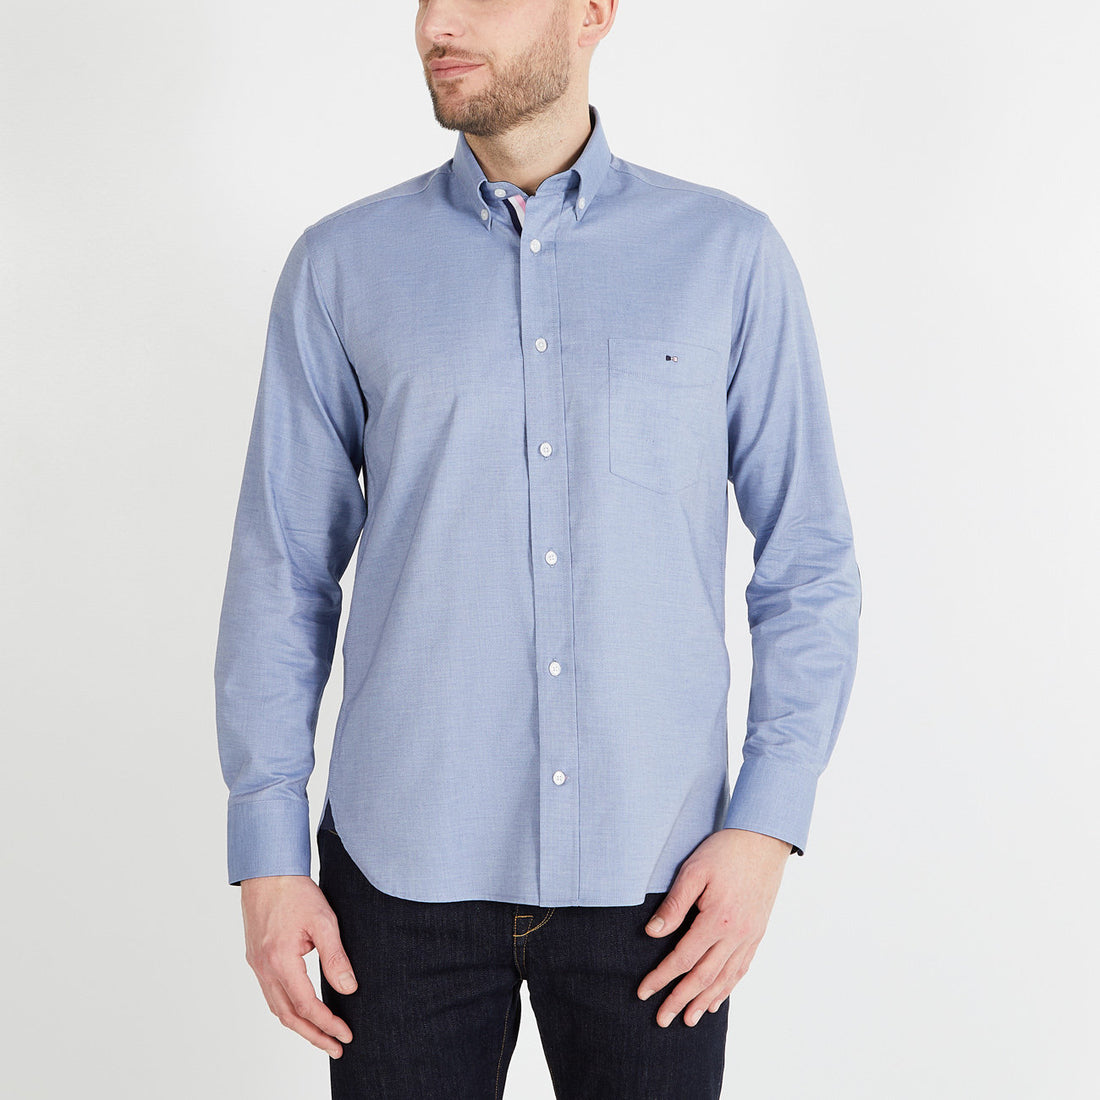 Pale Blue Shirt With Contrasting Elbow Patches_H23CHECL0032_BLM12_01